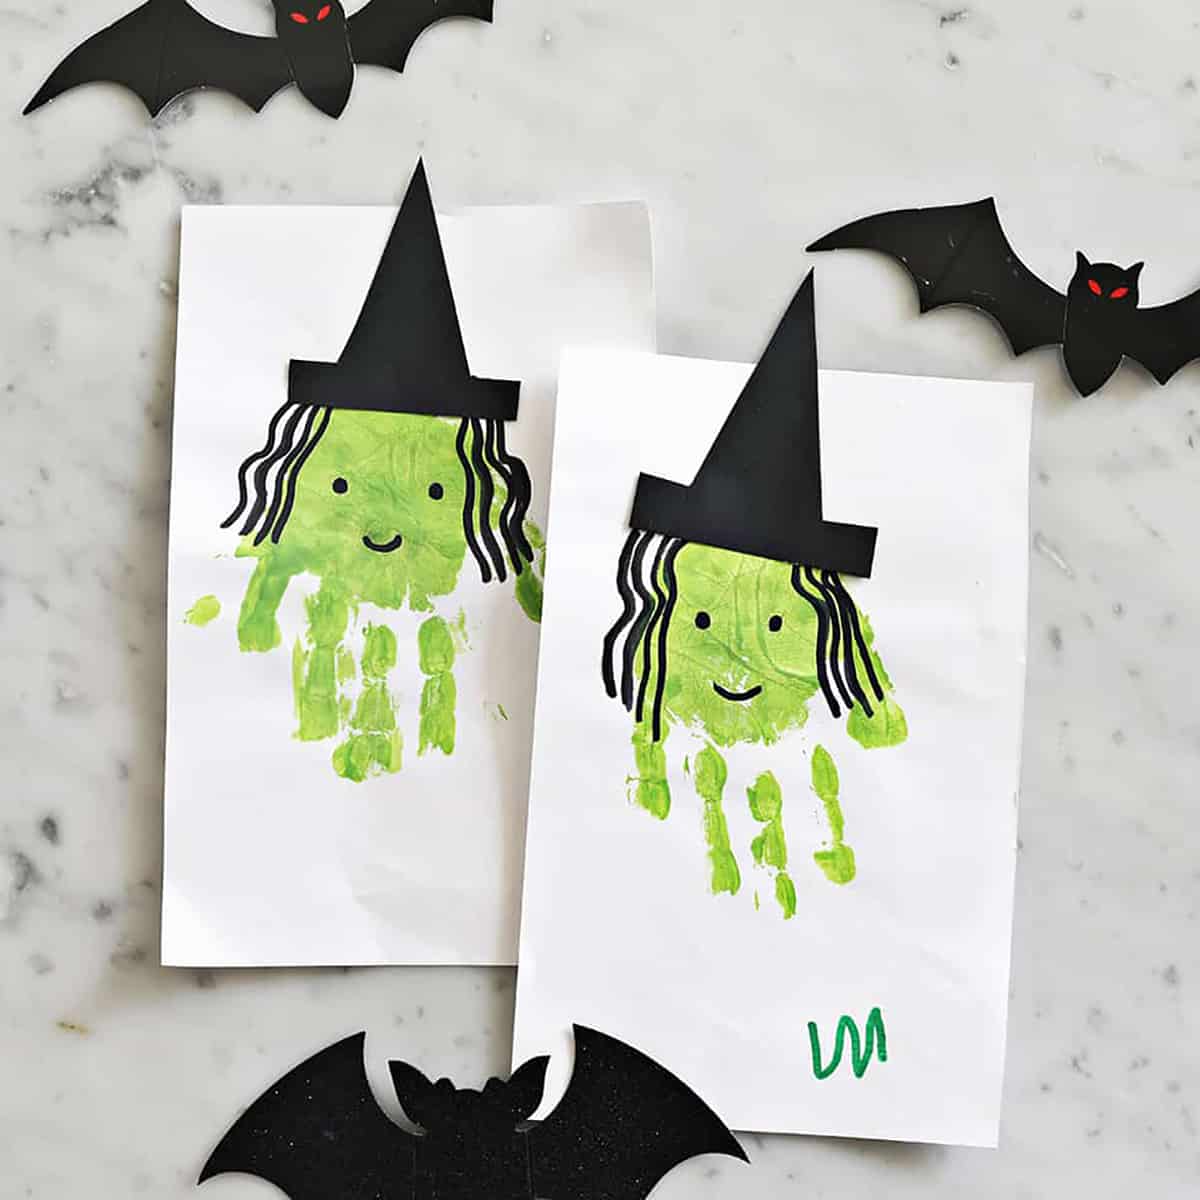 two pieces of construction paper with green handprints to look like witches.